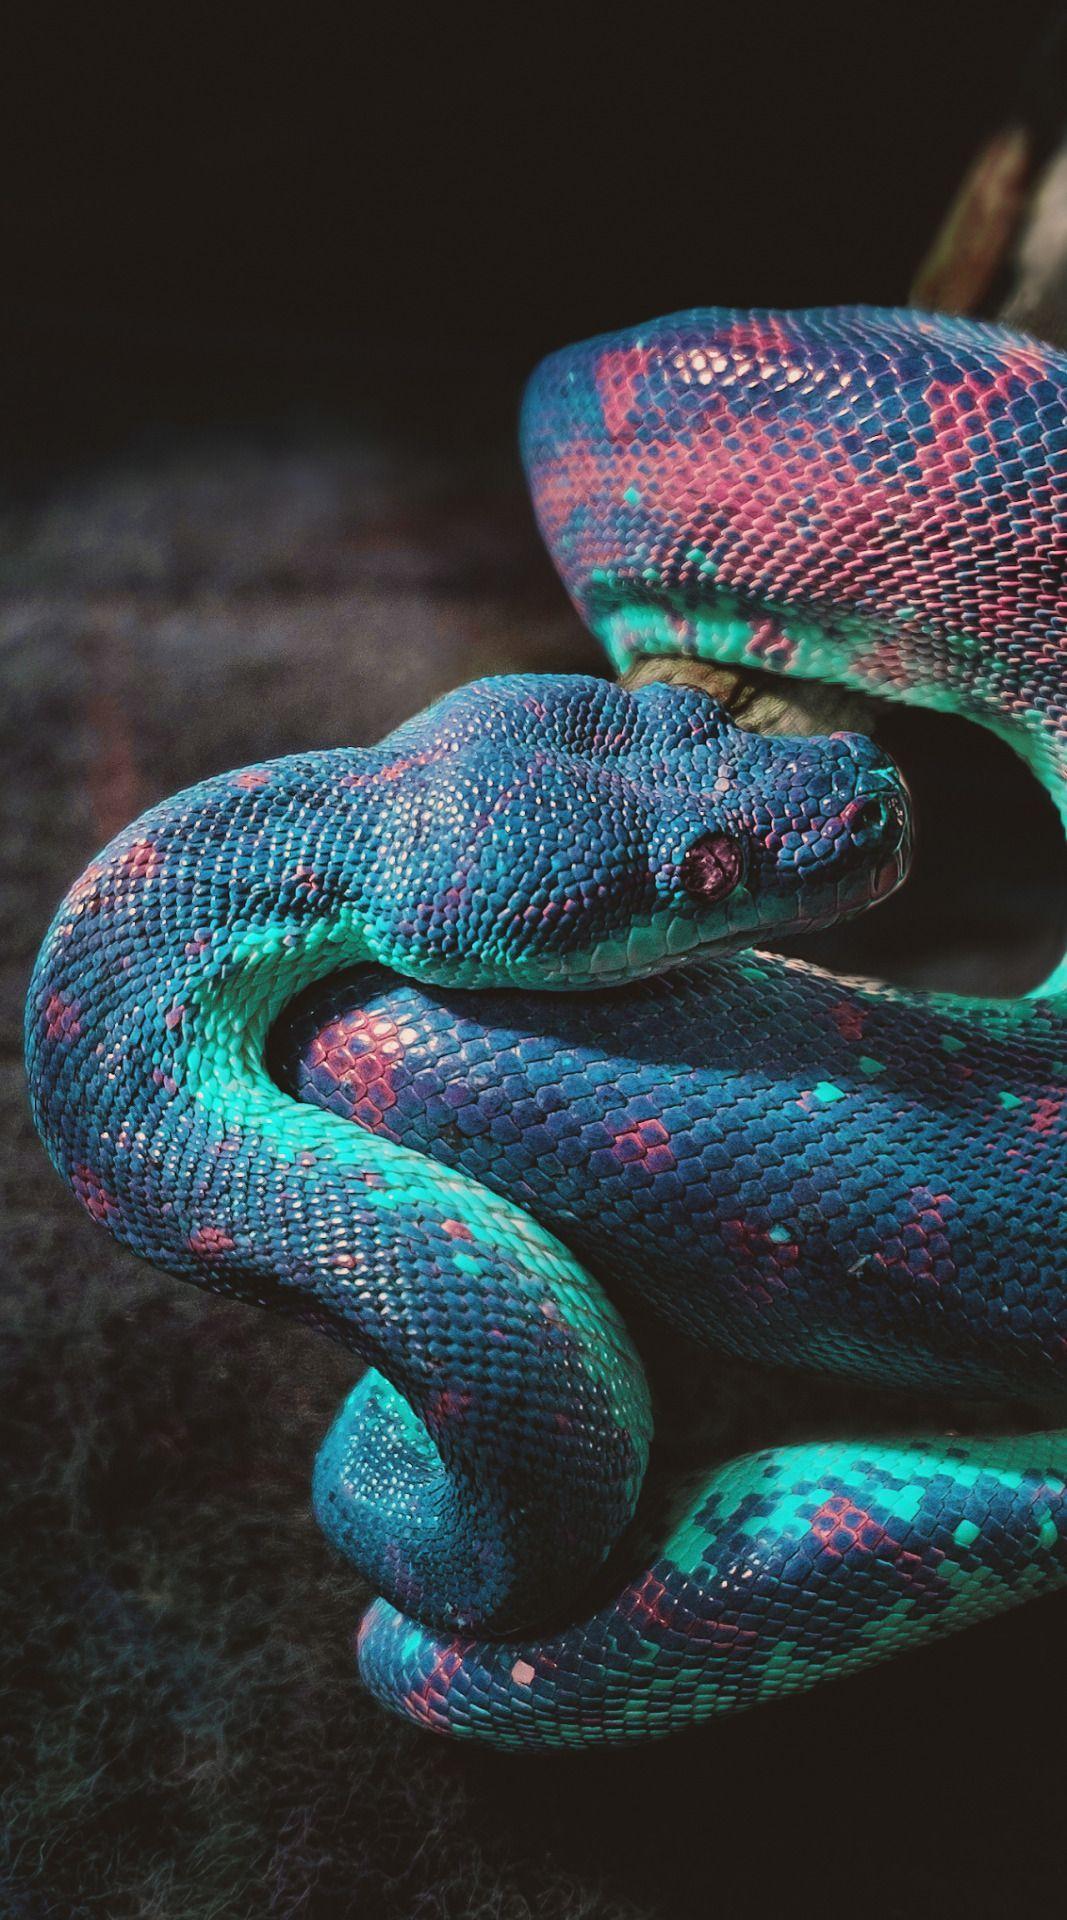 Download wallpaper 800x1200 snake color reptile iphone 4s4 for parallax  hd background